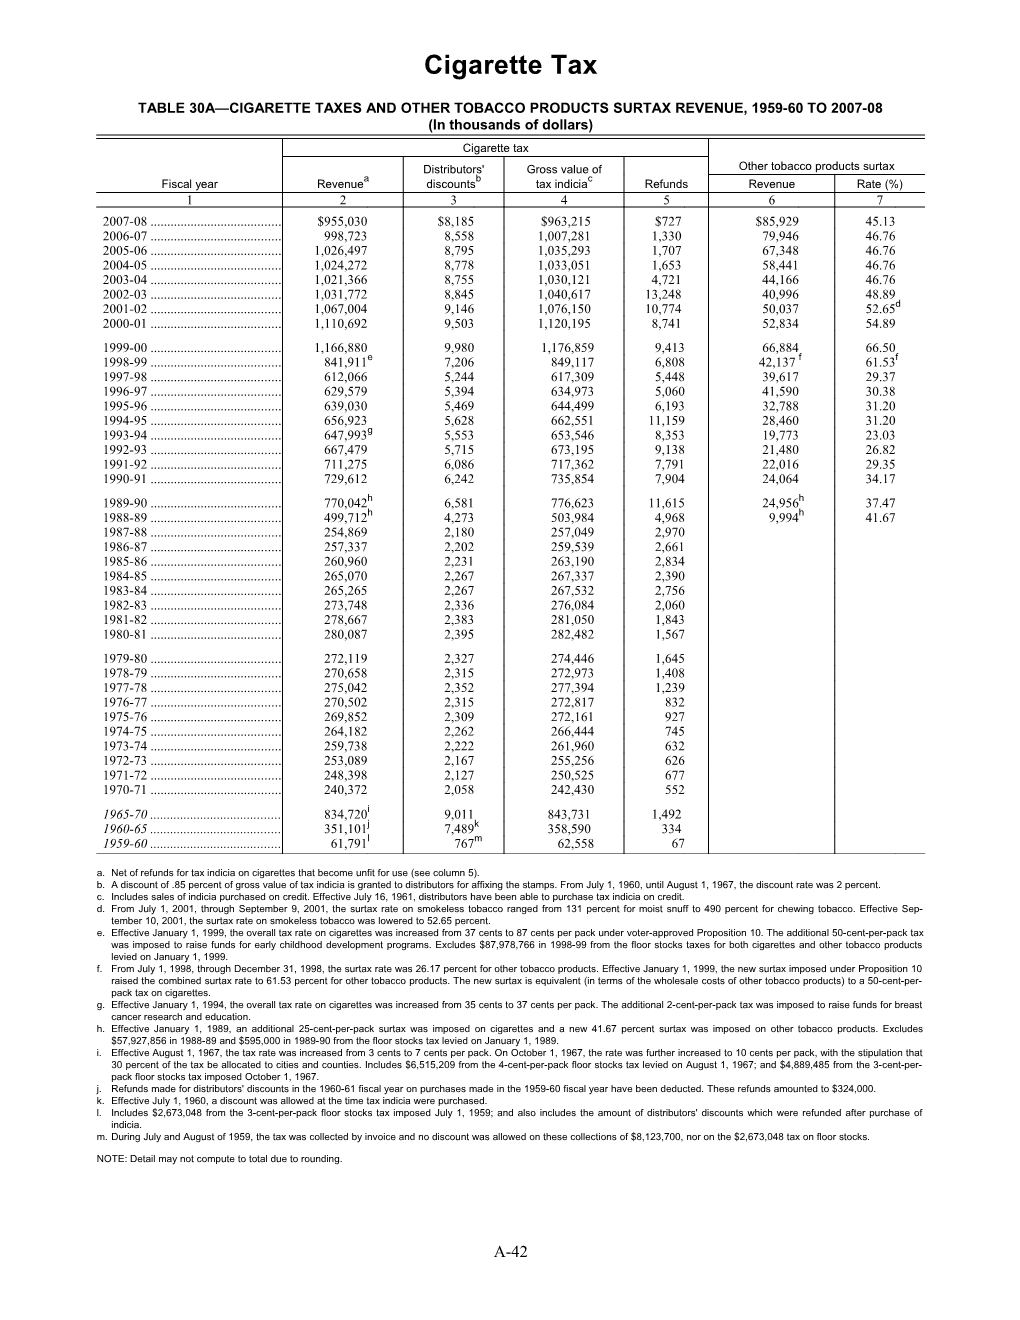 Table 30A Cigarette Taxes and Other Tobacco Products Surtax Revenue, 1959-60 to 2007-08